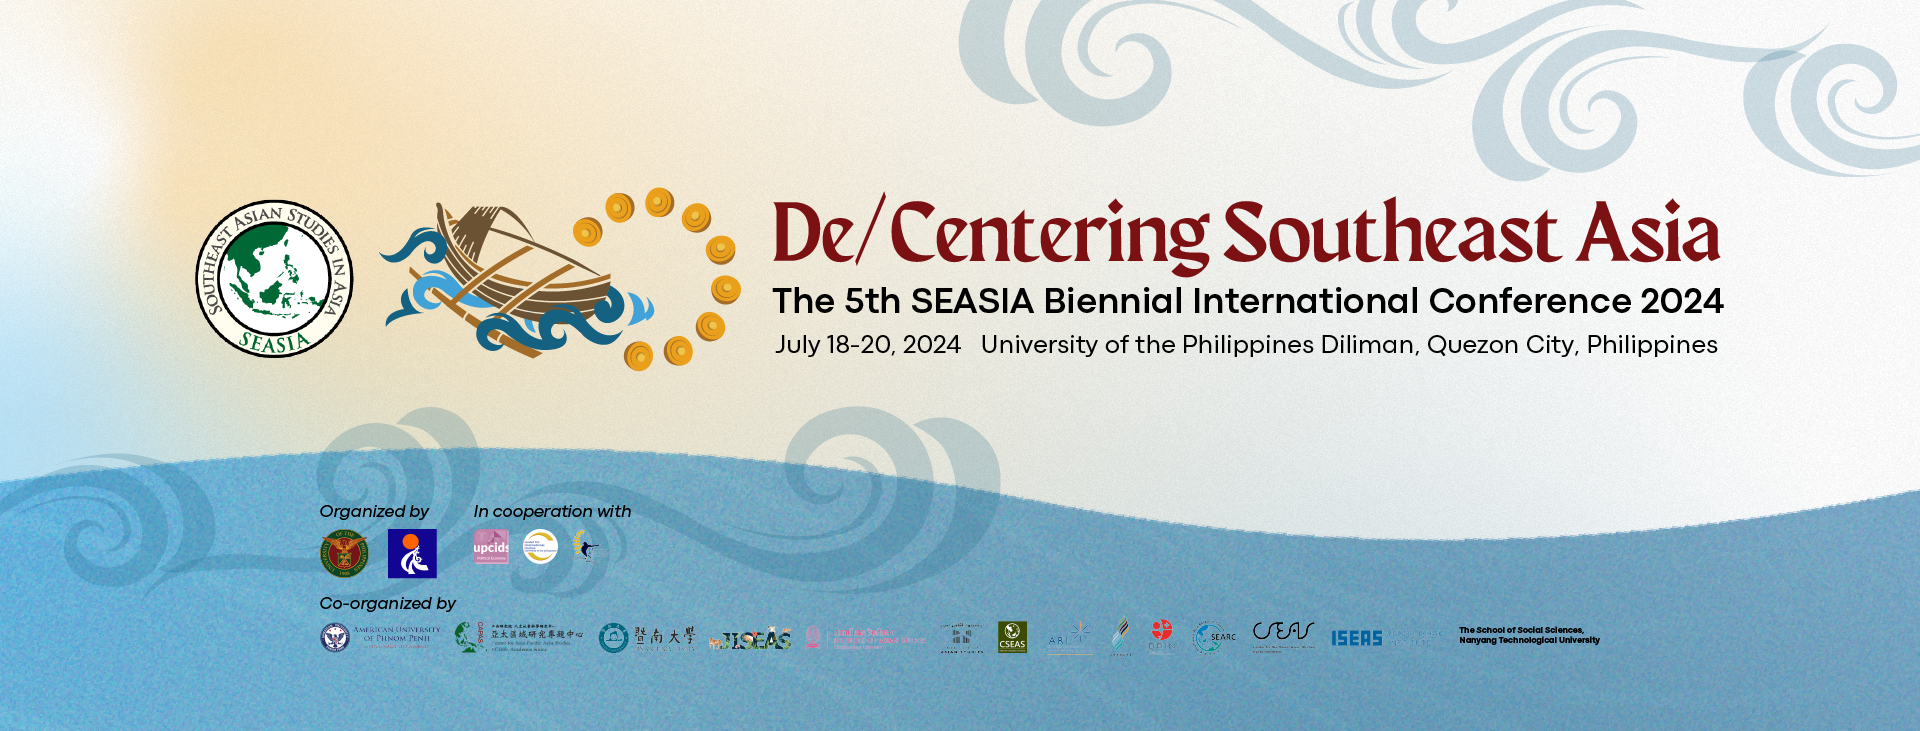 Call for Papers  |  De/Centering Southeast Asia: The 5th SEASIA Biennial International Conference 2024